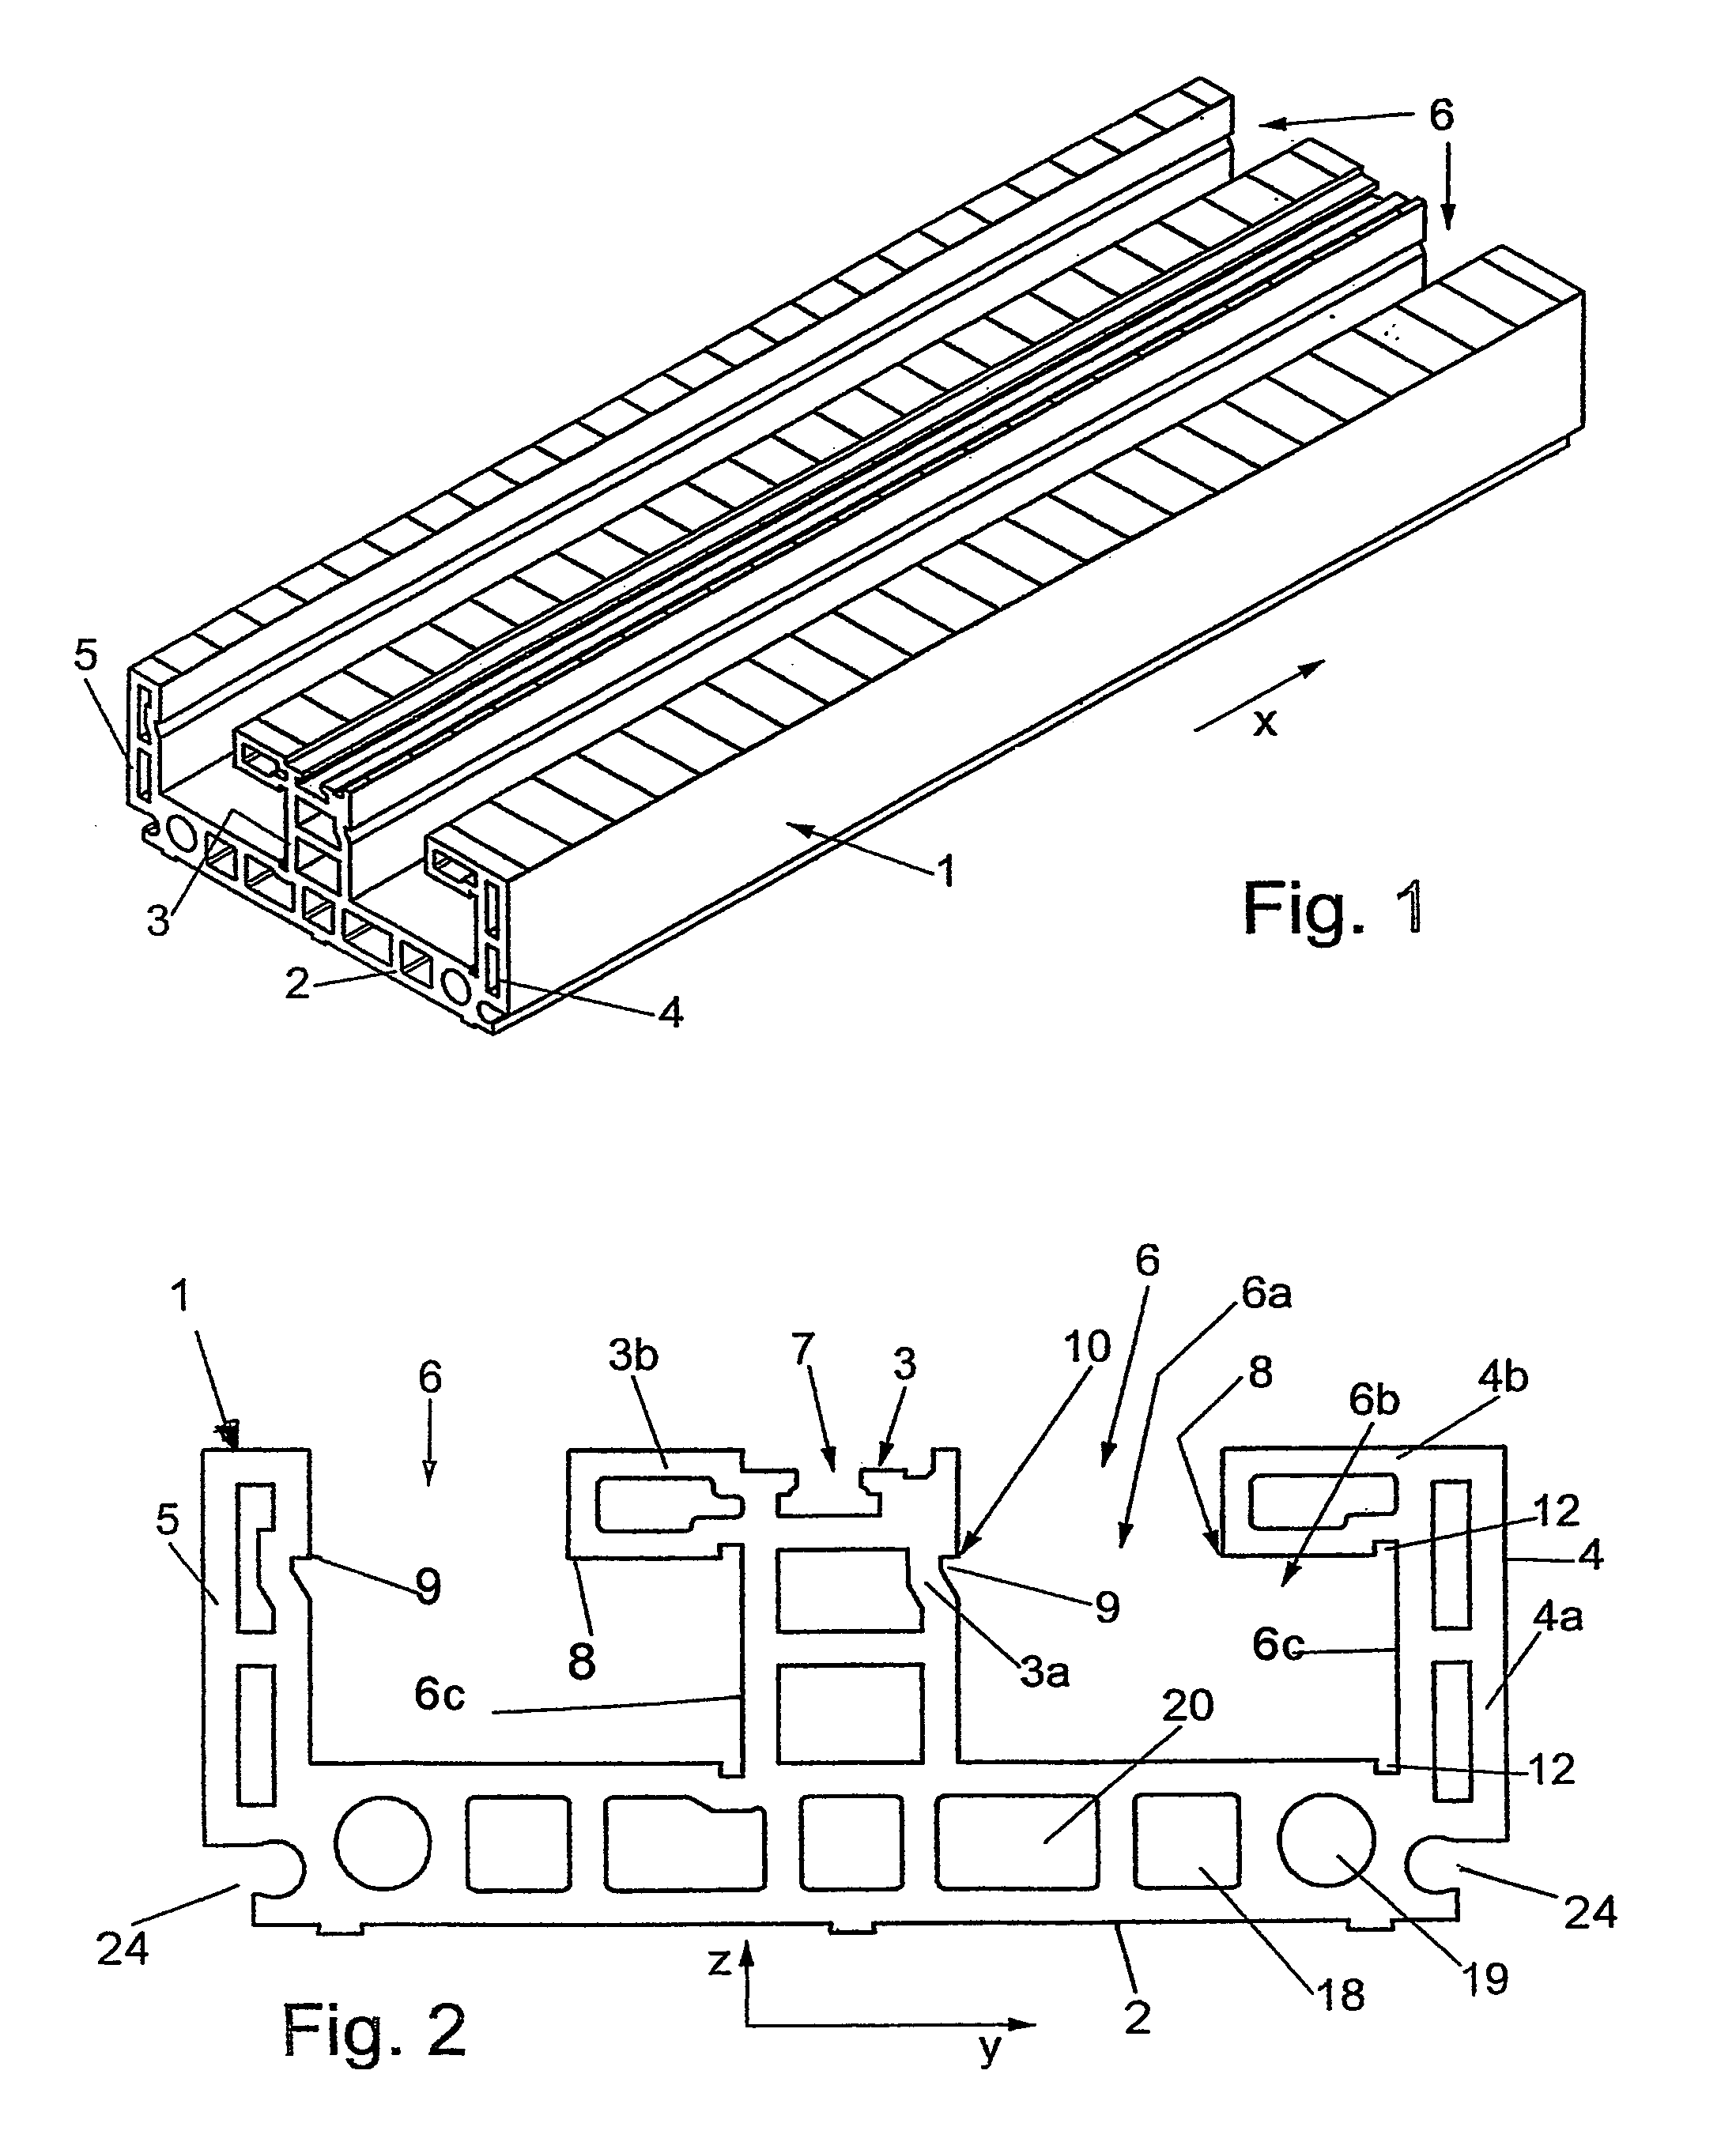 Apparatus for mounting electrical and mechanical components on a support body